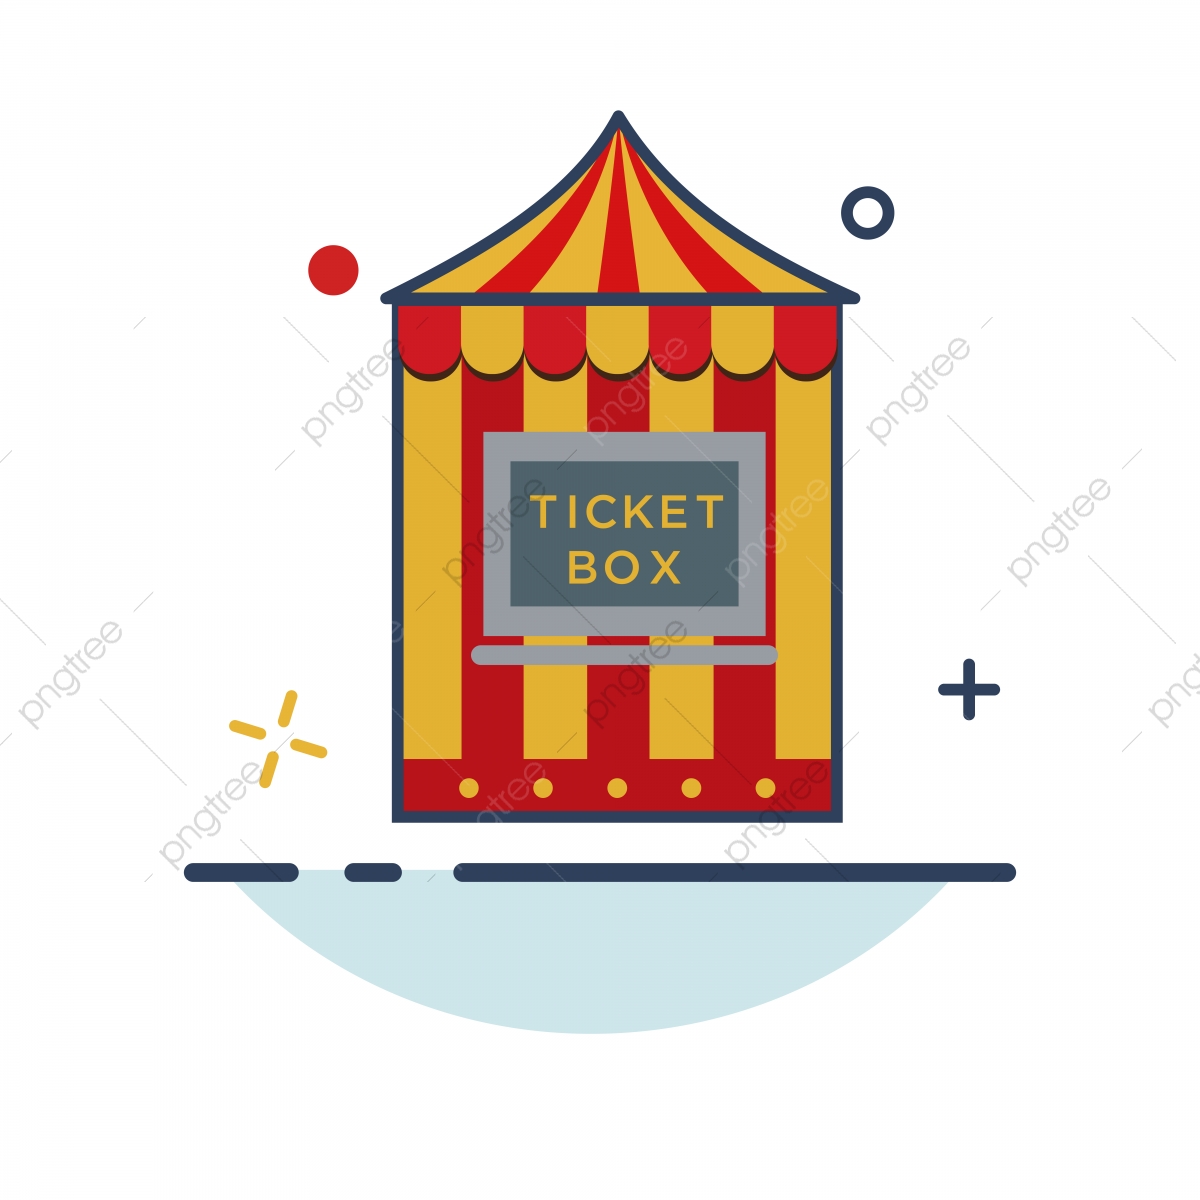 Carnival icon with outline. Ticket clipart ticket box